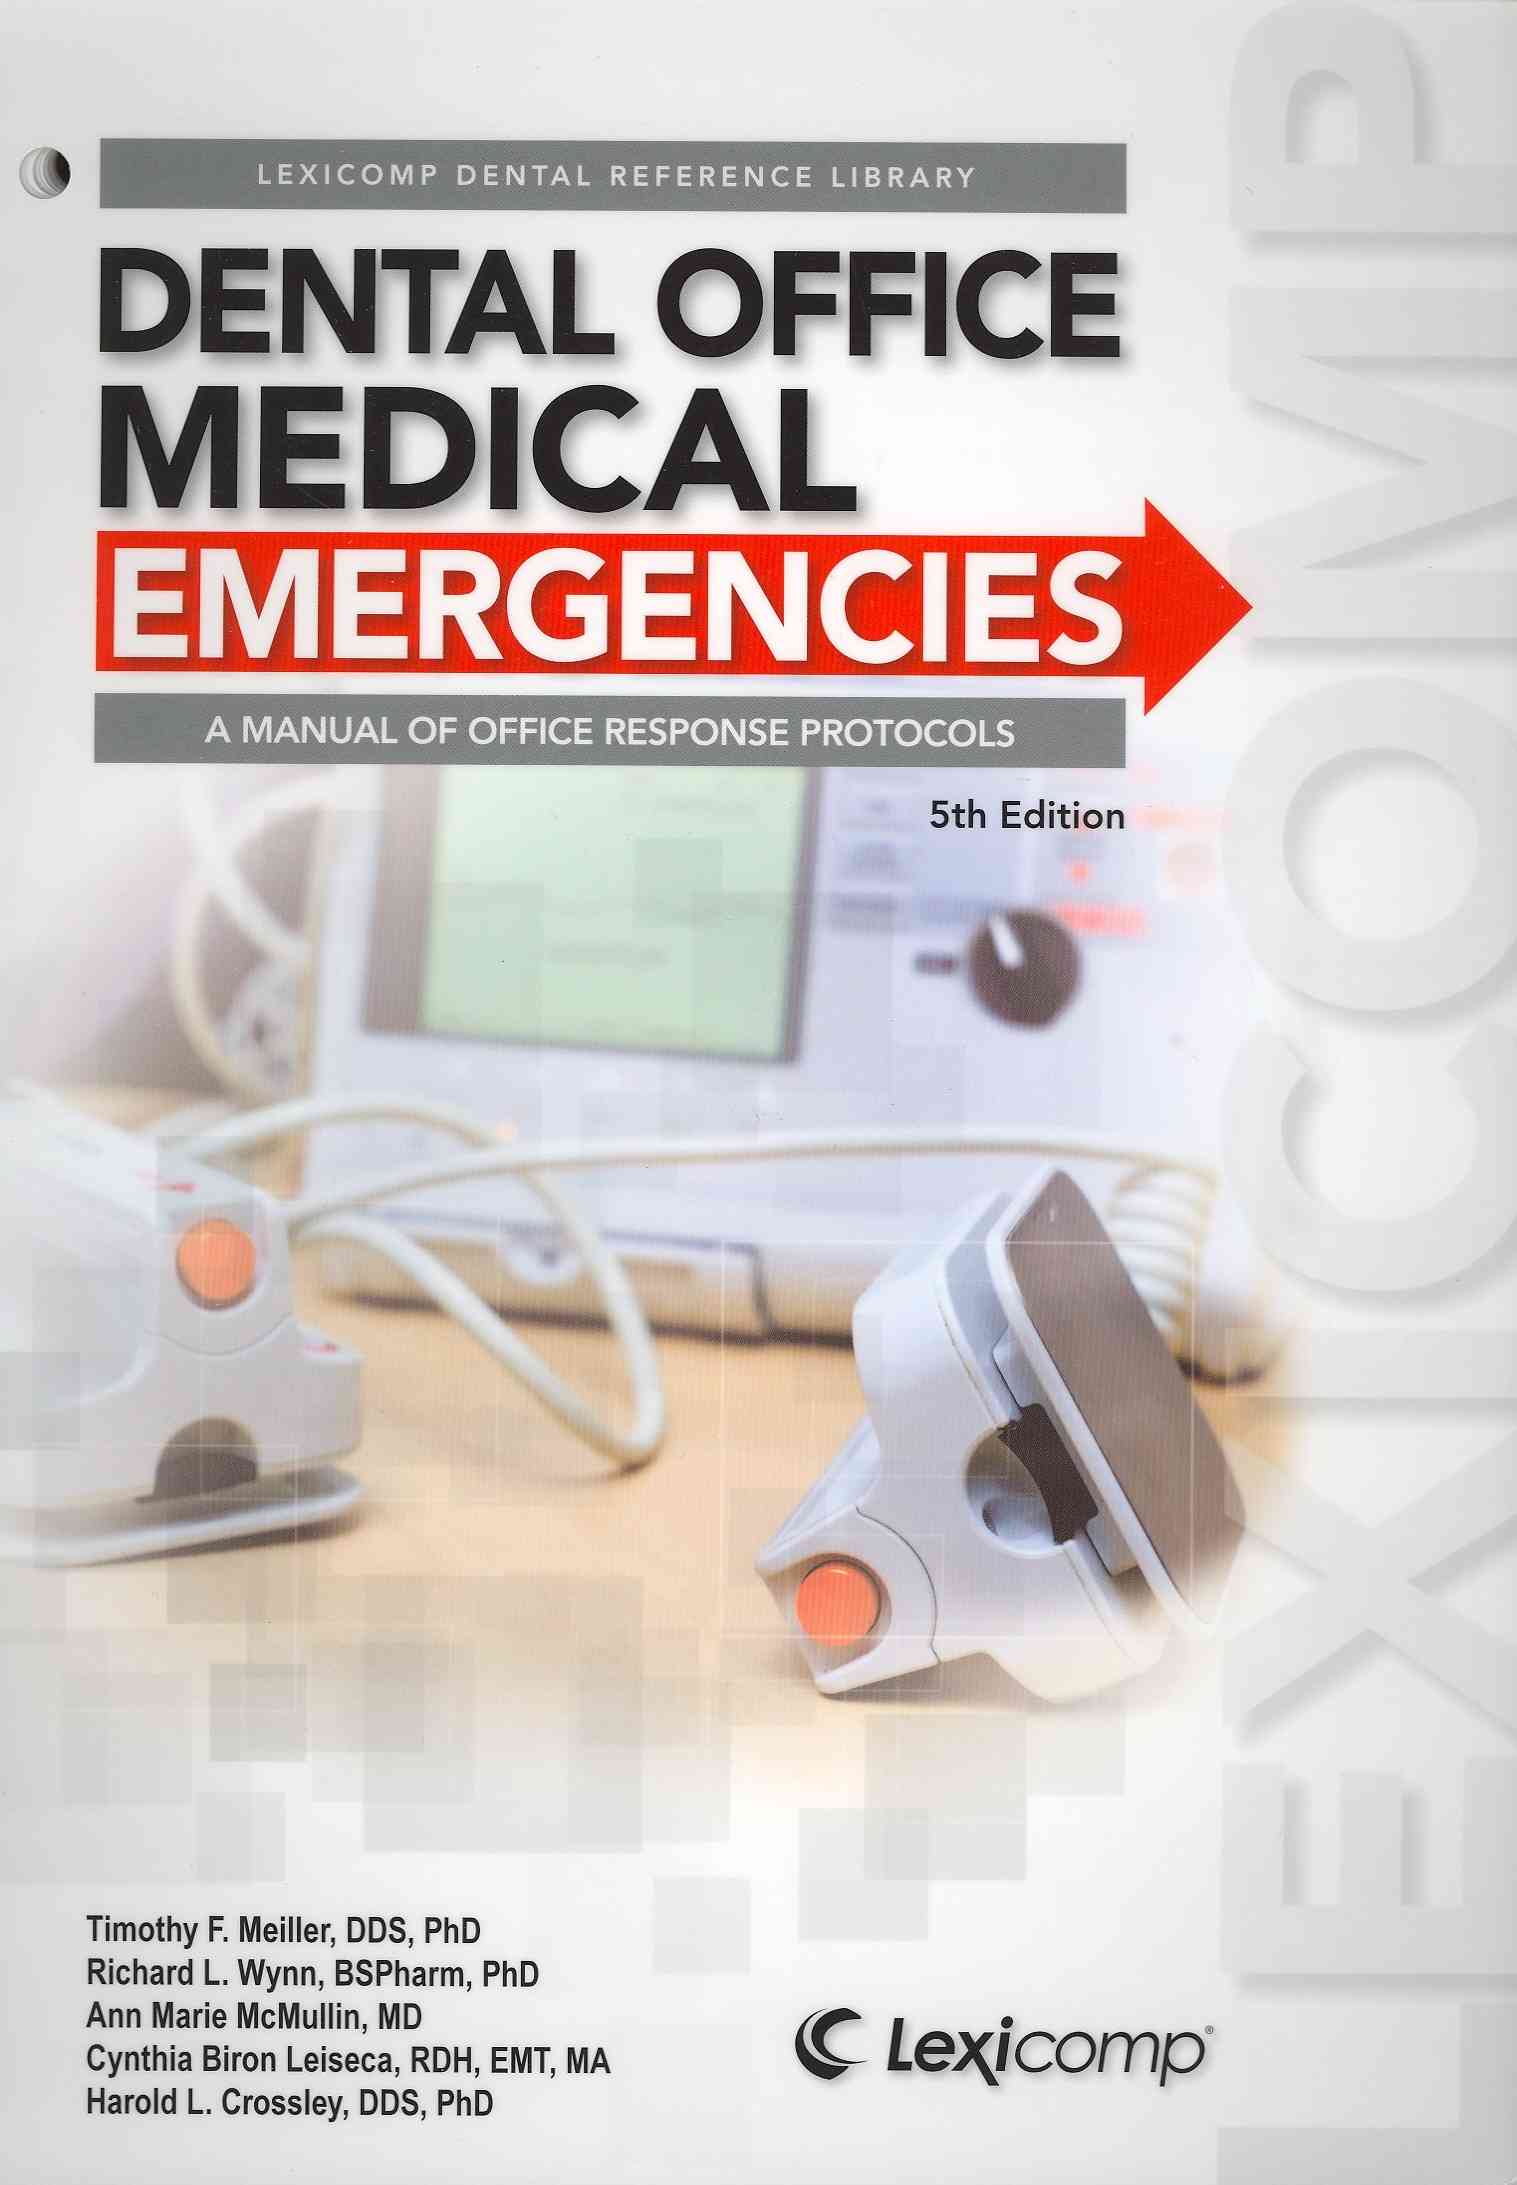 Lexi-Comp's Dental Office Medical Emergencies: A Manual of Office Response Protocols (Lexi-Comp's Dental Reference Library) Timothy F. Meiller, Richard L. Wynn, Ann Marie, M.D. McMullin and Cynthia Biron